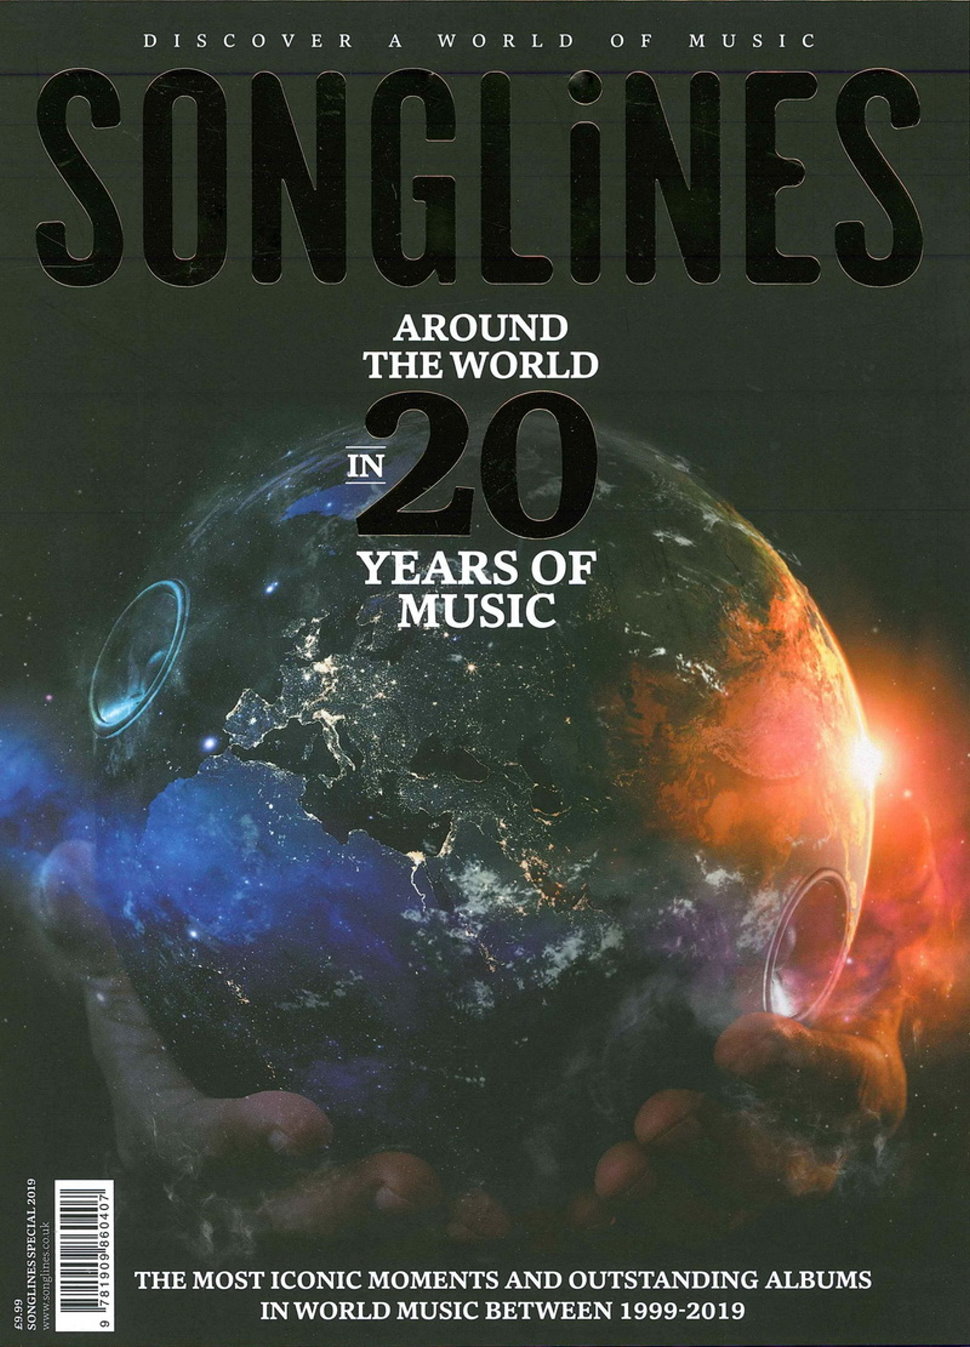 SONGLiNES Pres AROUND THE WORLD 20 YEARS OF MUSIC